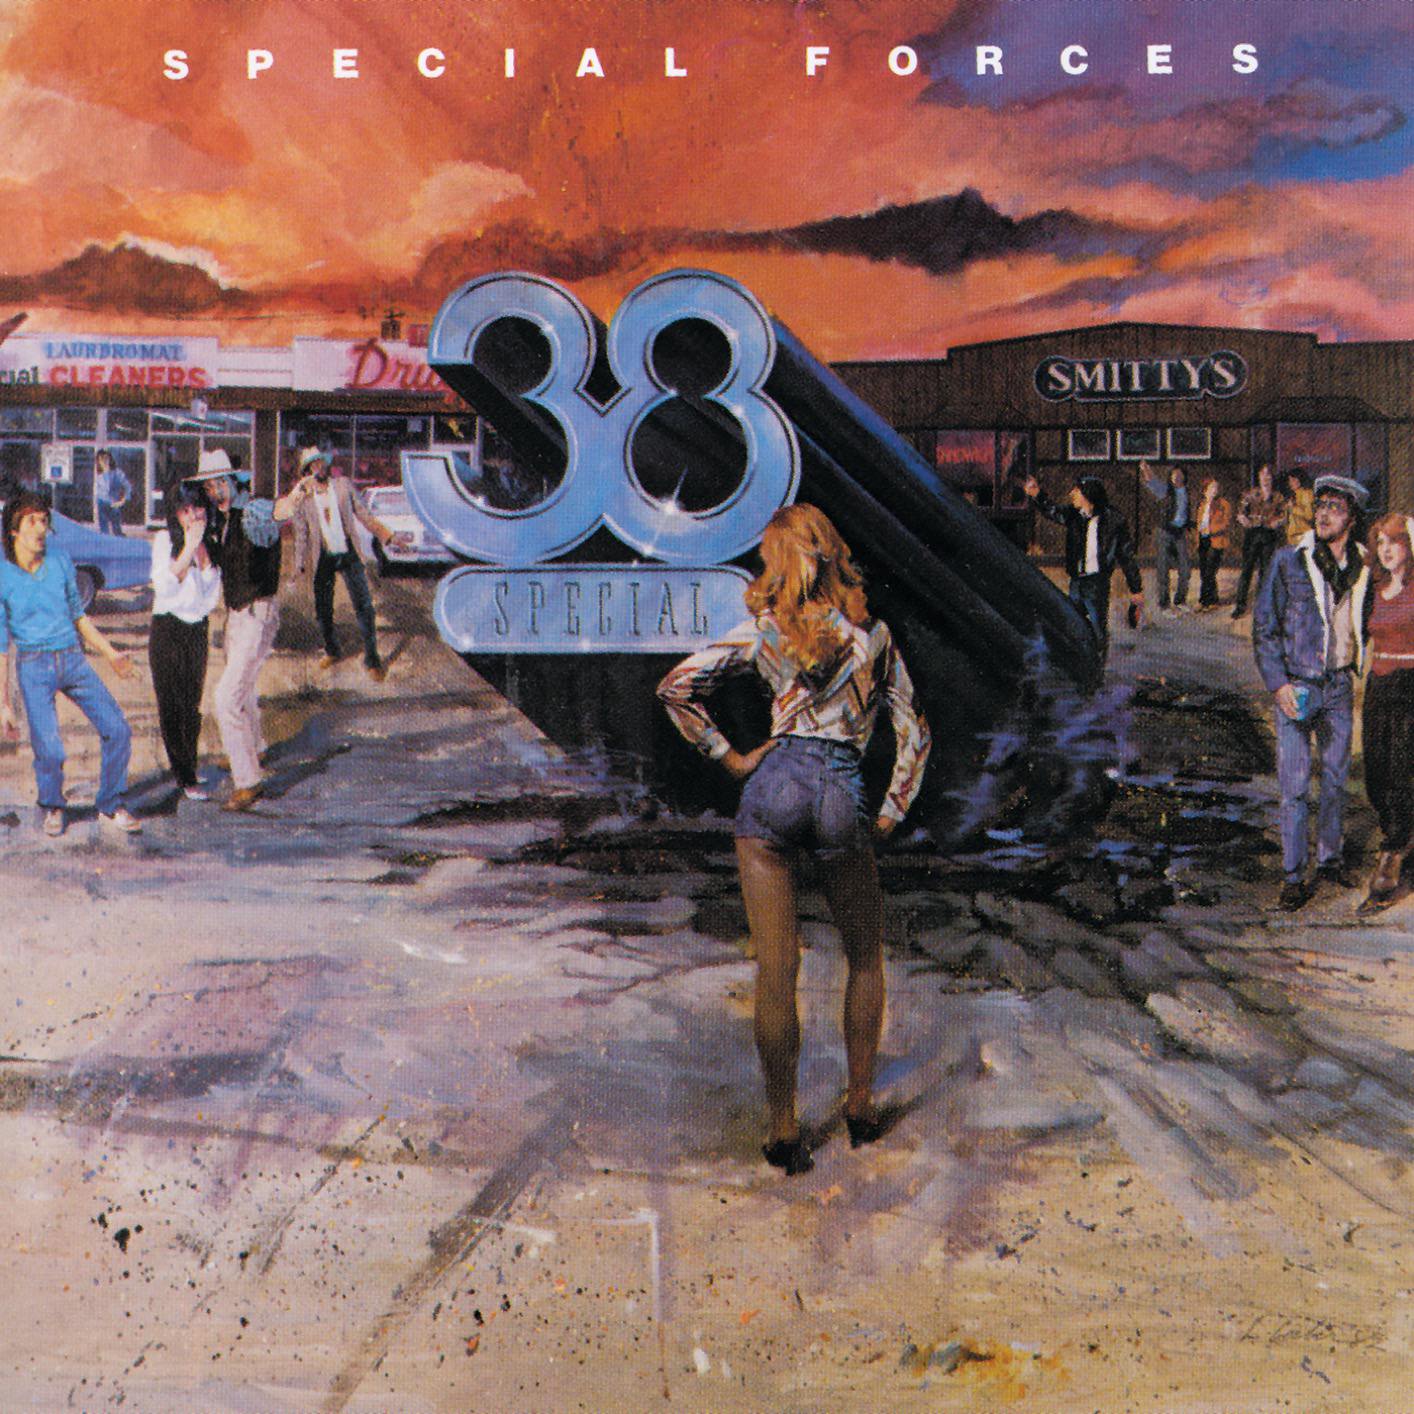 38 Special - Special Forces (1982/2018) [FLAC 24bit/96kHz]